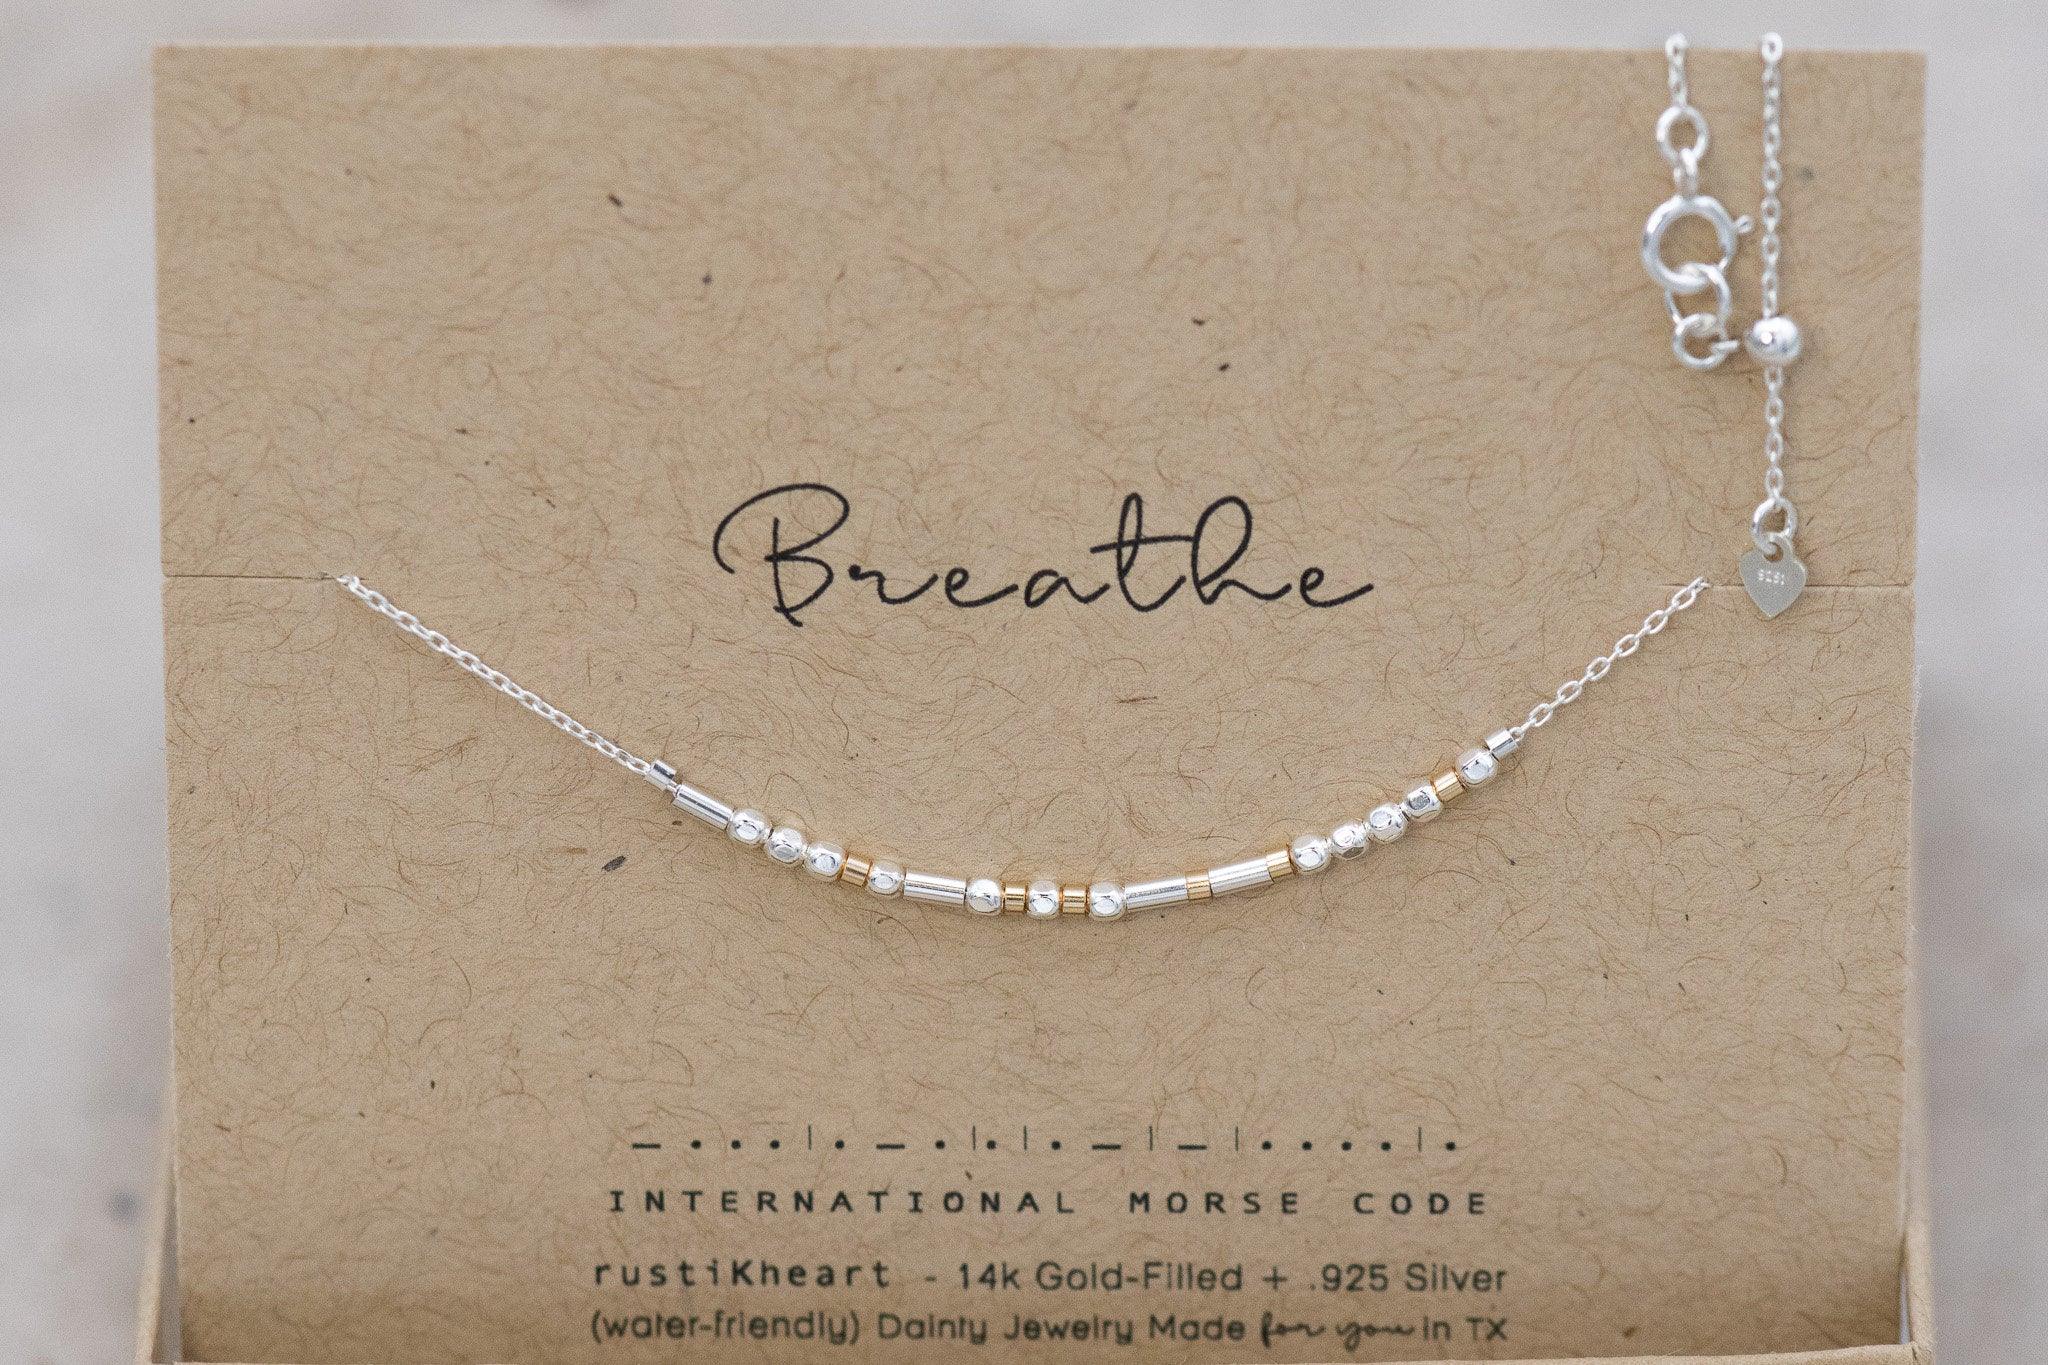 custom morse code silver necklace personalized gift morse code jewelry breathe necklace remember to breathe yoga relax yogi gift morseanddainty com 3